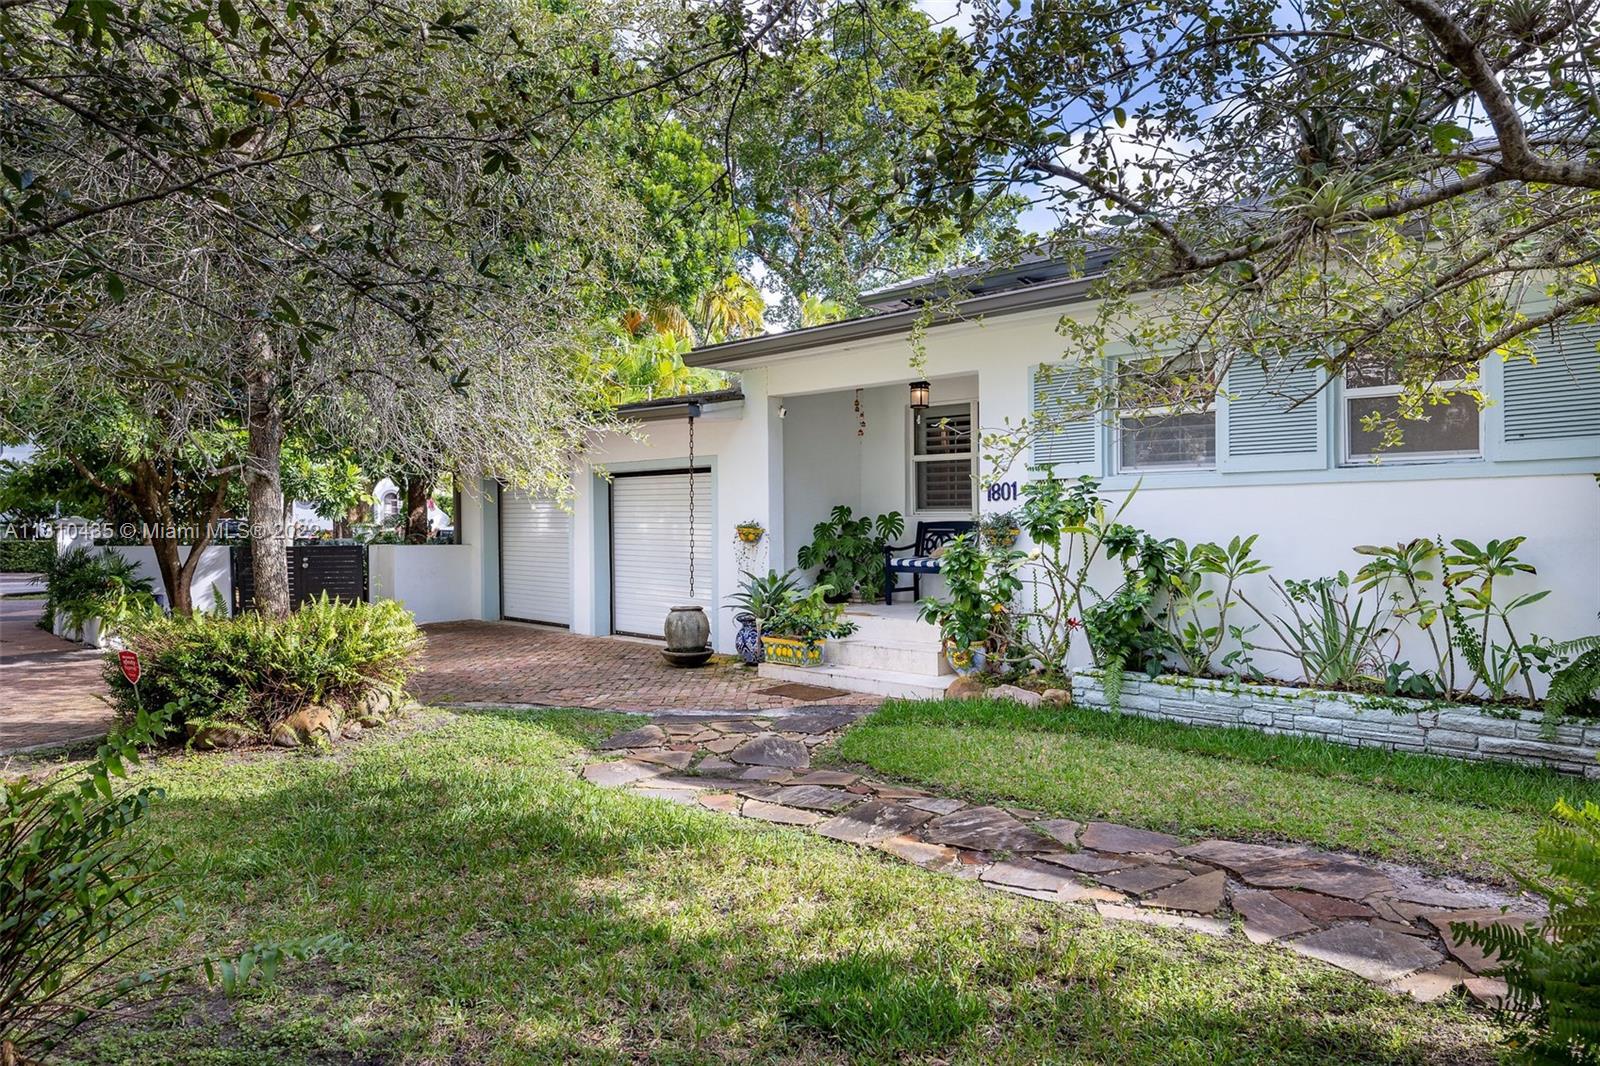 Come and see this beautiful and centrally located home in the tranquil neighborhood of "North" Coral Gables. This unique 2,040 sqft home has it all. It features 3Bedrooms and 3Bathrooms, an entertainment room, an updated kitchen, and a beautiful pool to enjoy all year. Walk into the ample living room/dining area with plenty of natural light and high ceilings. Other updates include a new roof with solar panels, stainless steel appliances, impact windows/doors throughout, wood floors, and more. This house is move-in ready. Make an appointment today. It will not last.